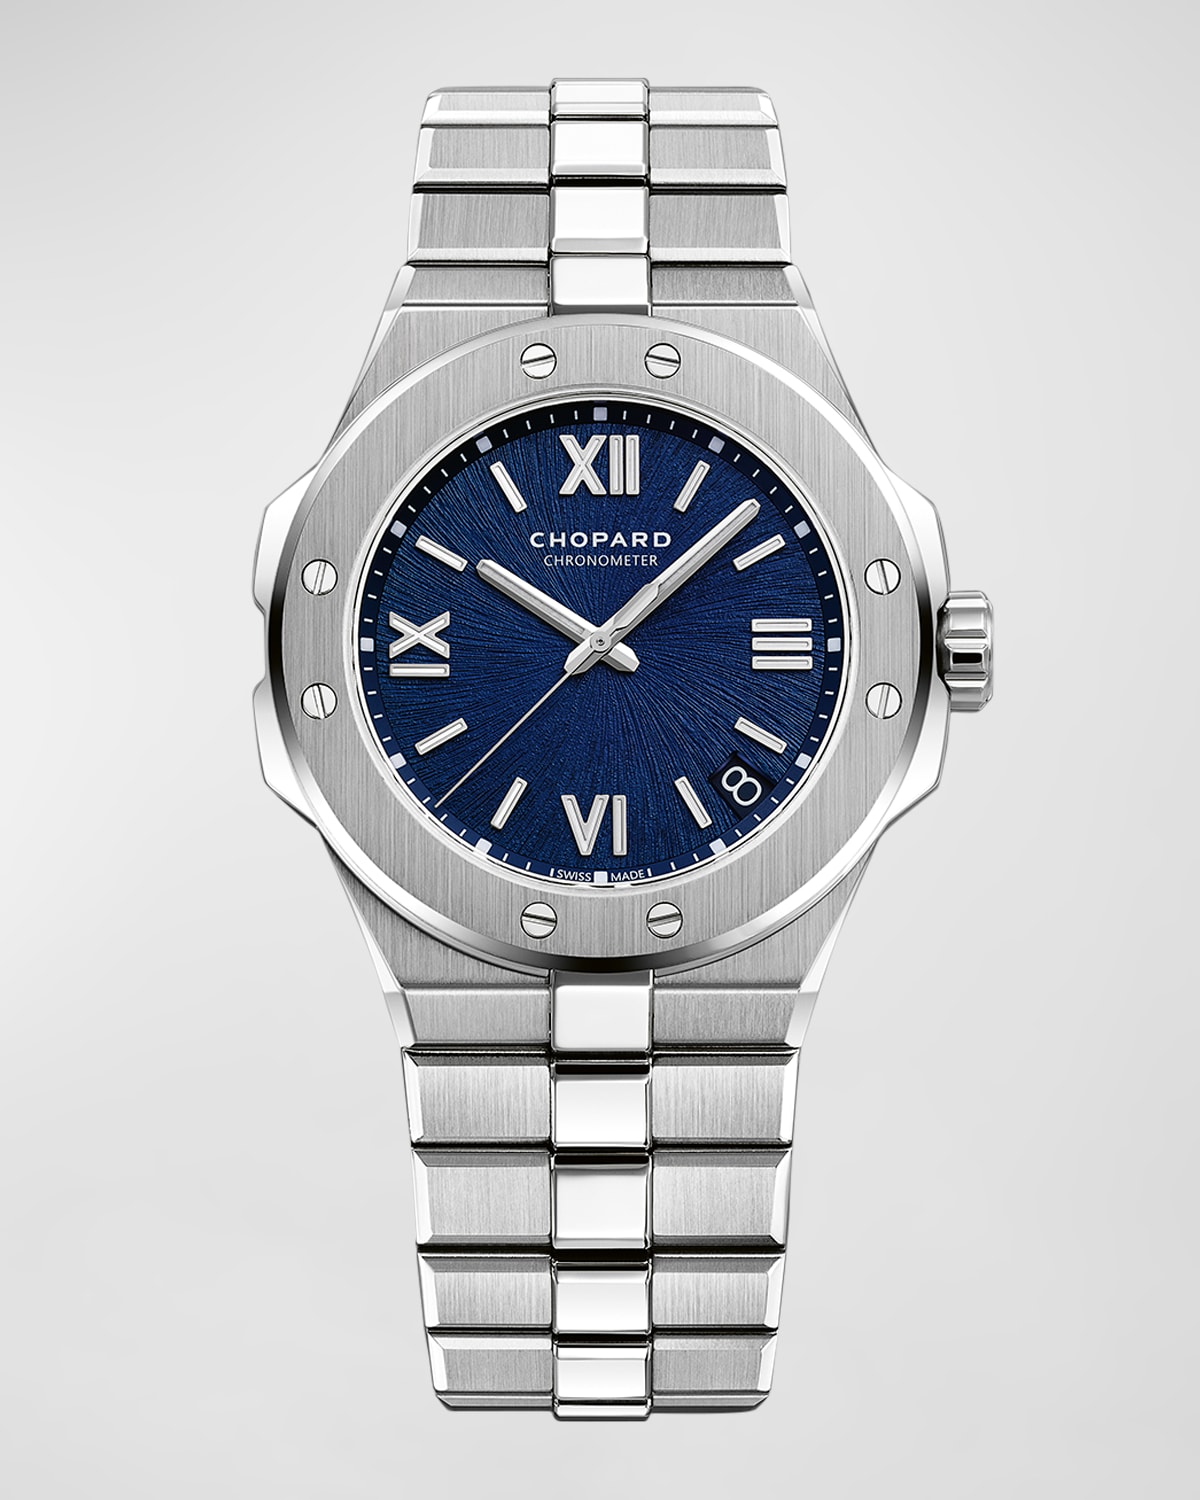 Chopard Alpine Eagle Large Automatic 41mm Lucent Steel Watch, Ref. No. 298600-3001 In Blue